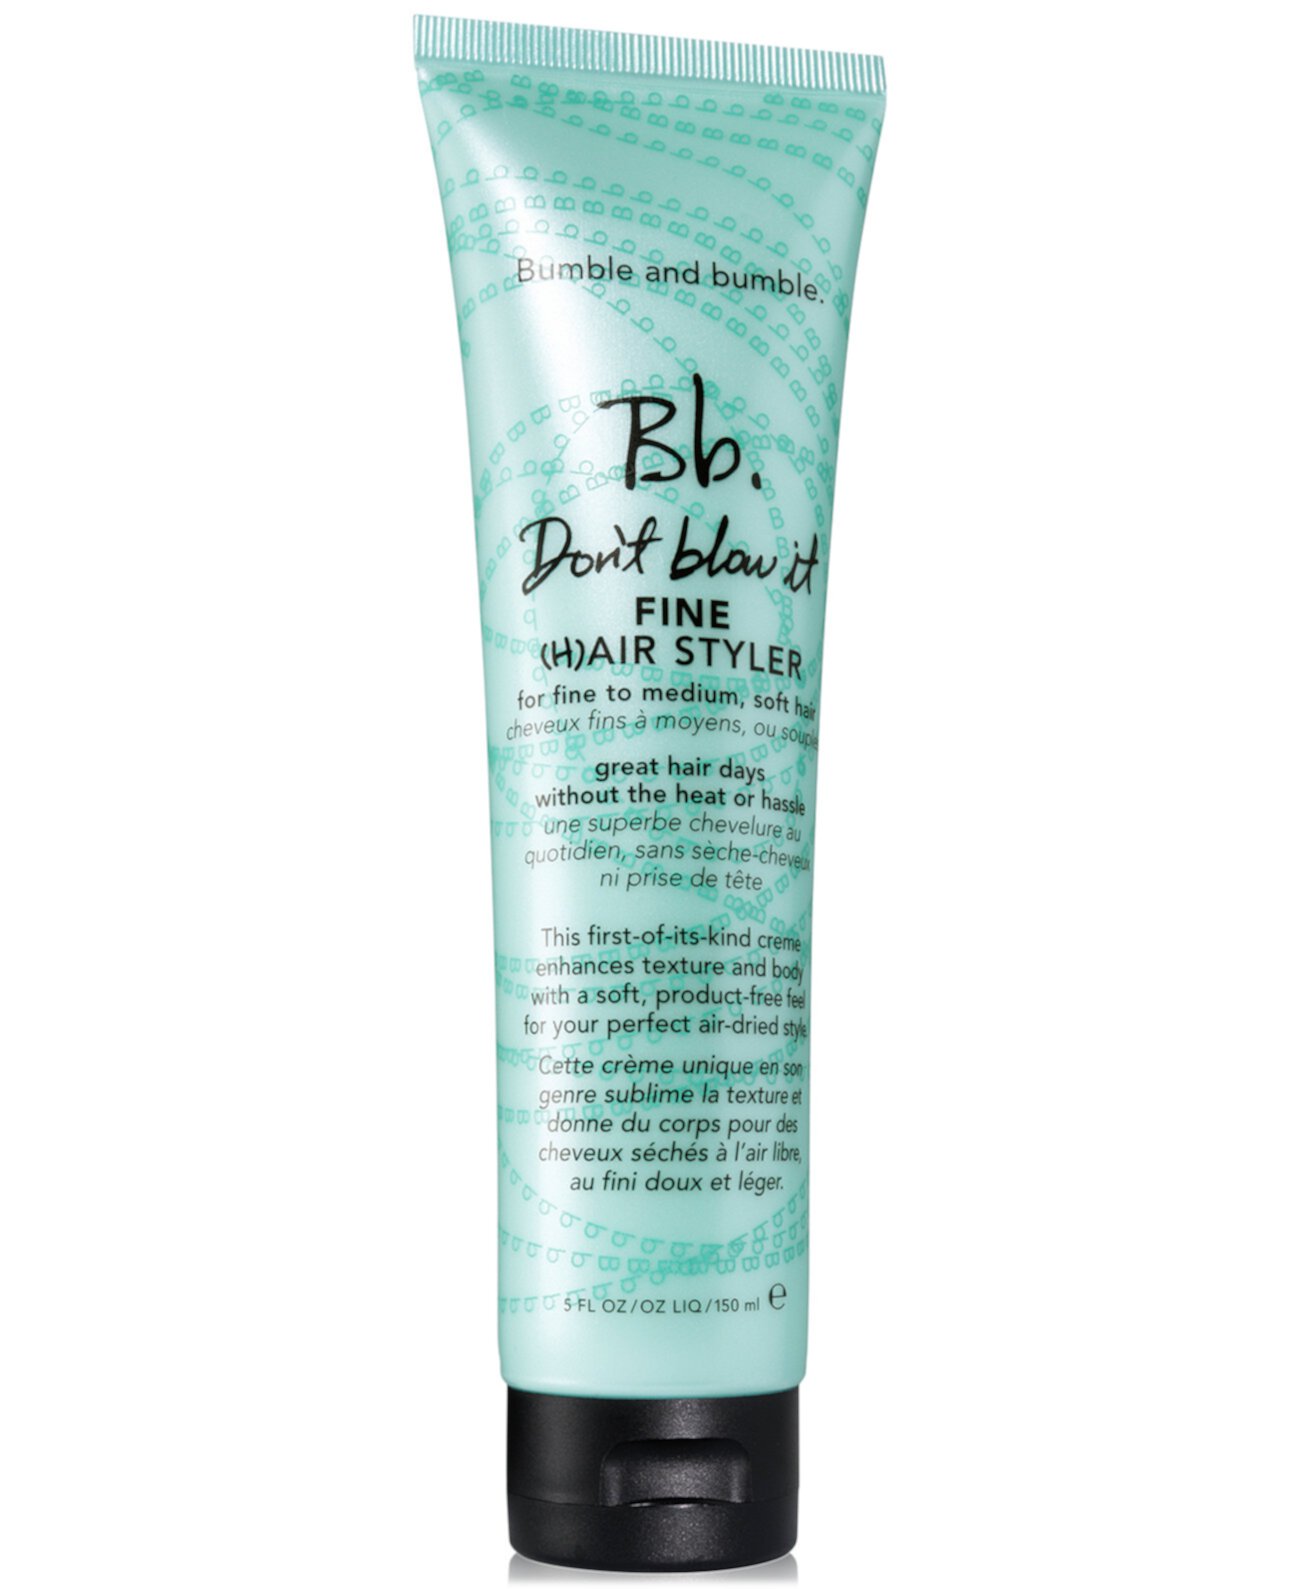 Blow It Fine Hair Styler, 5 унций. Bumble and bumble